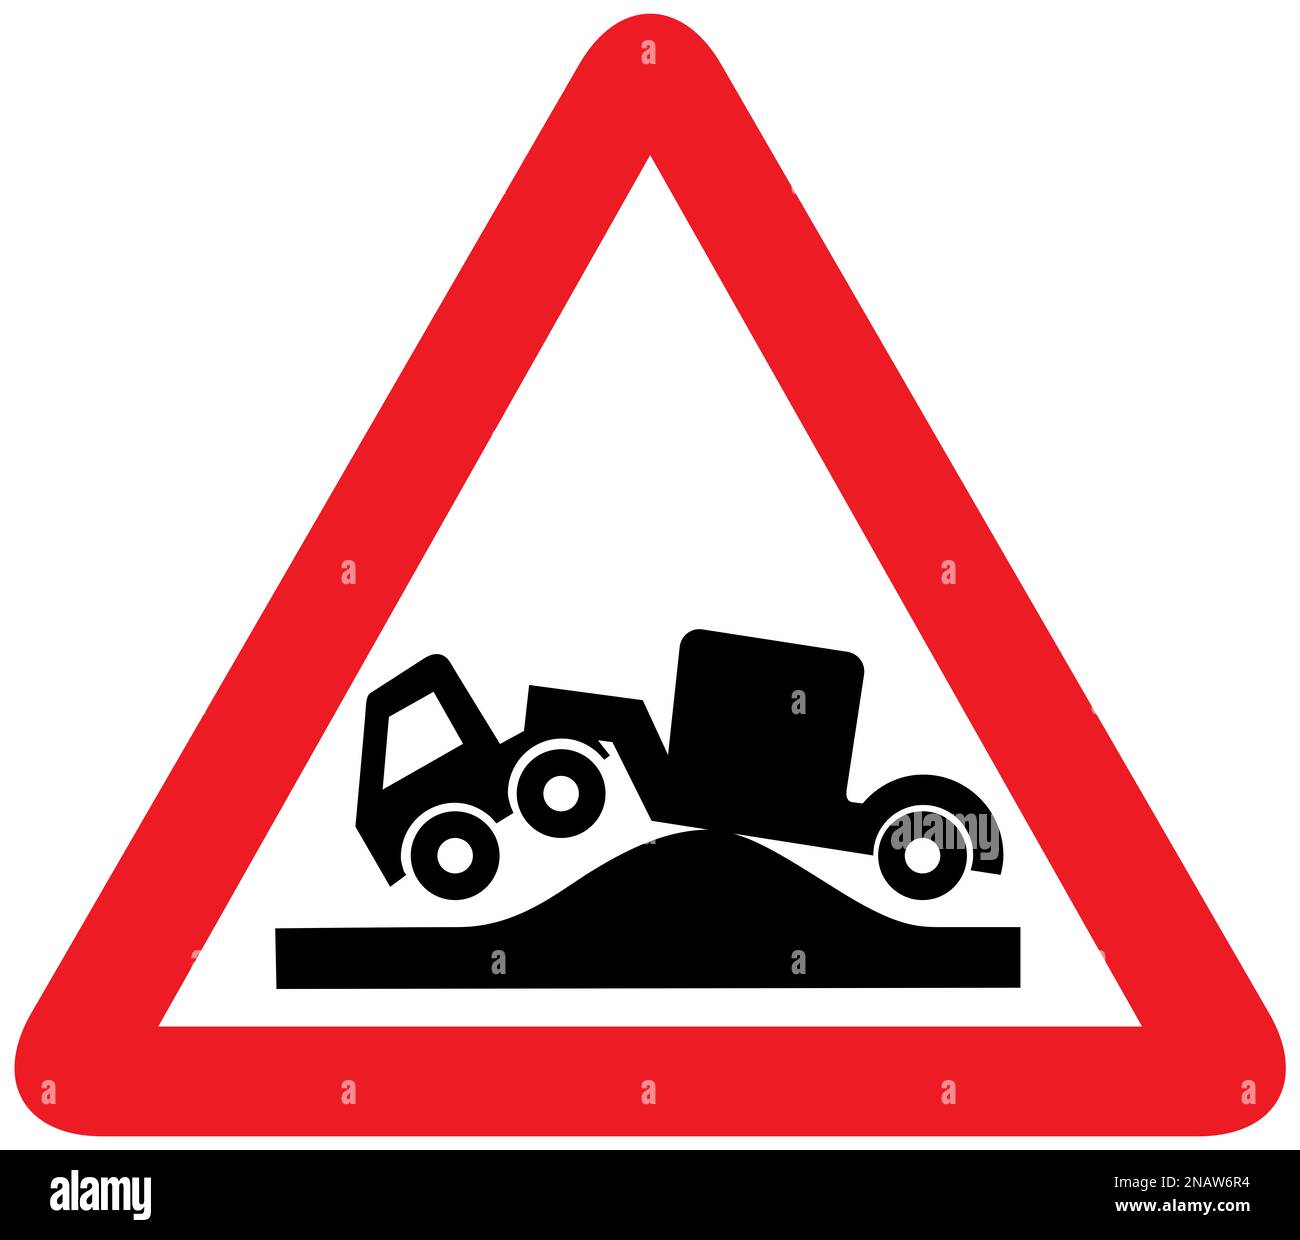 Risk of grounding ahead British road sign Stock Photo